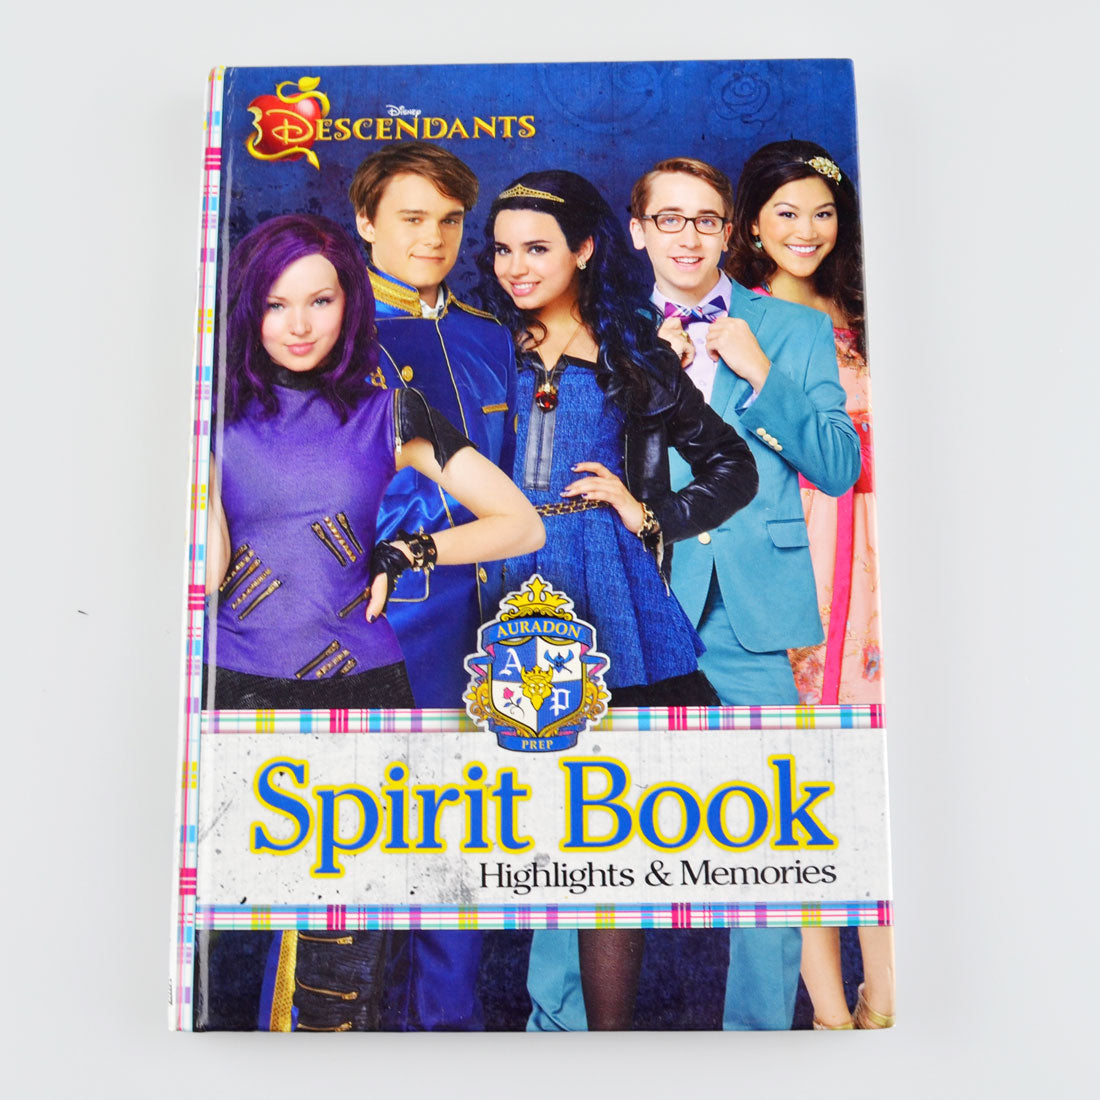 Descendants Spirit Book Highlights and Memories by Disney Channel - Hardcover